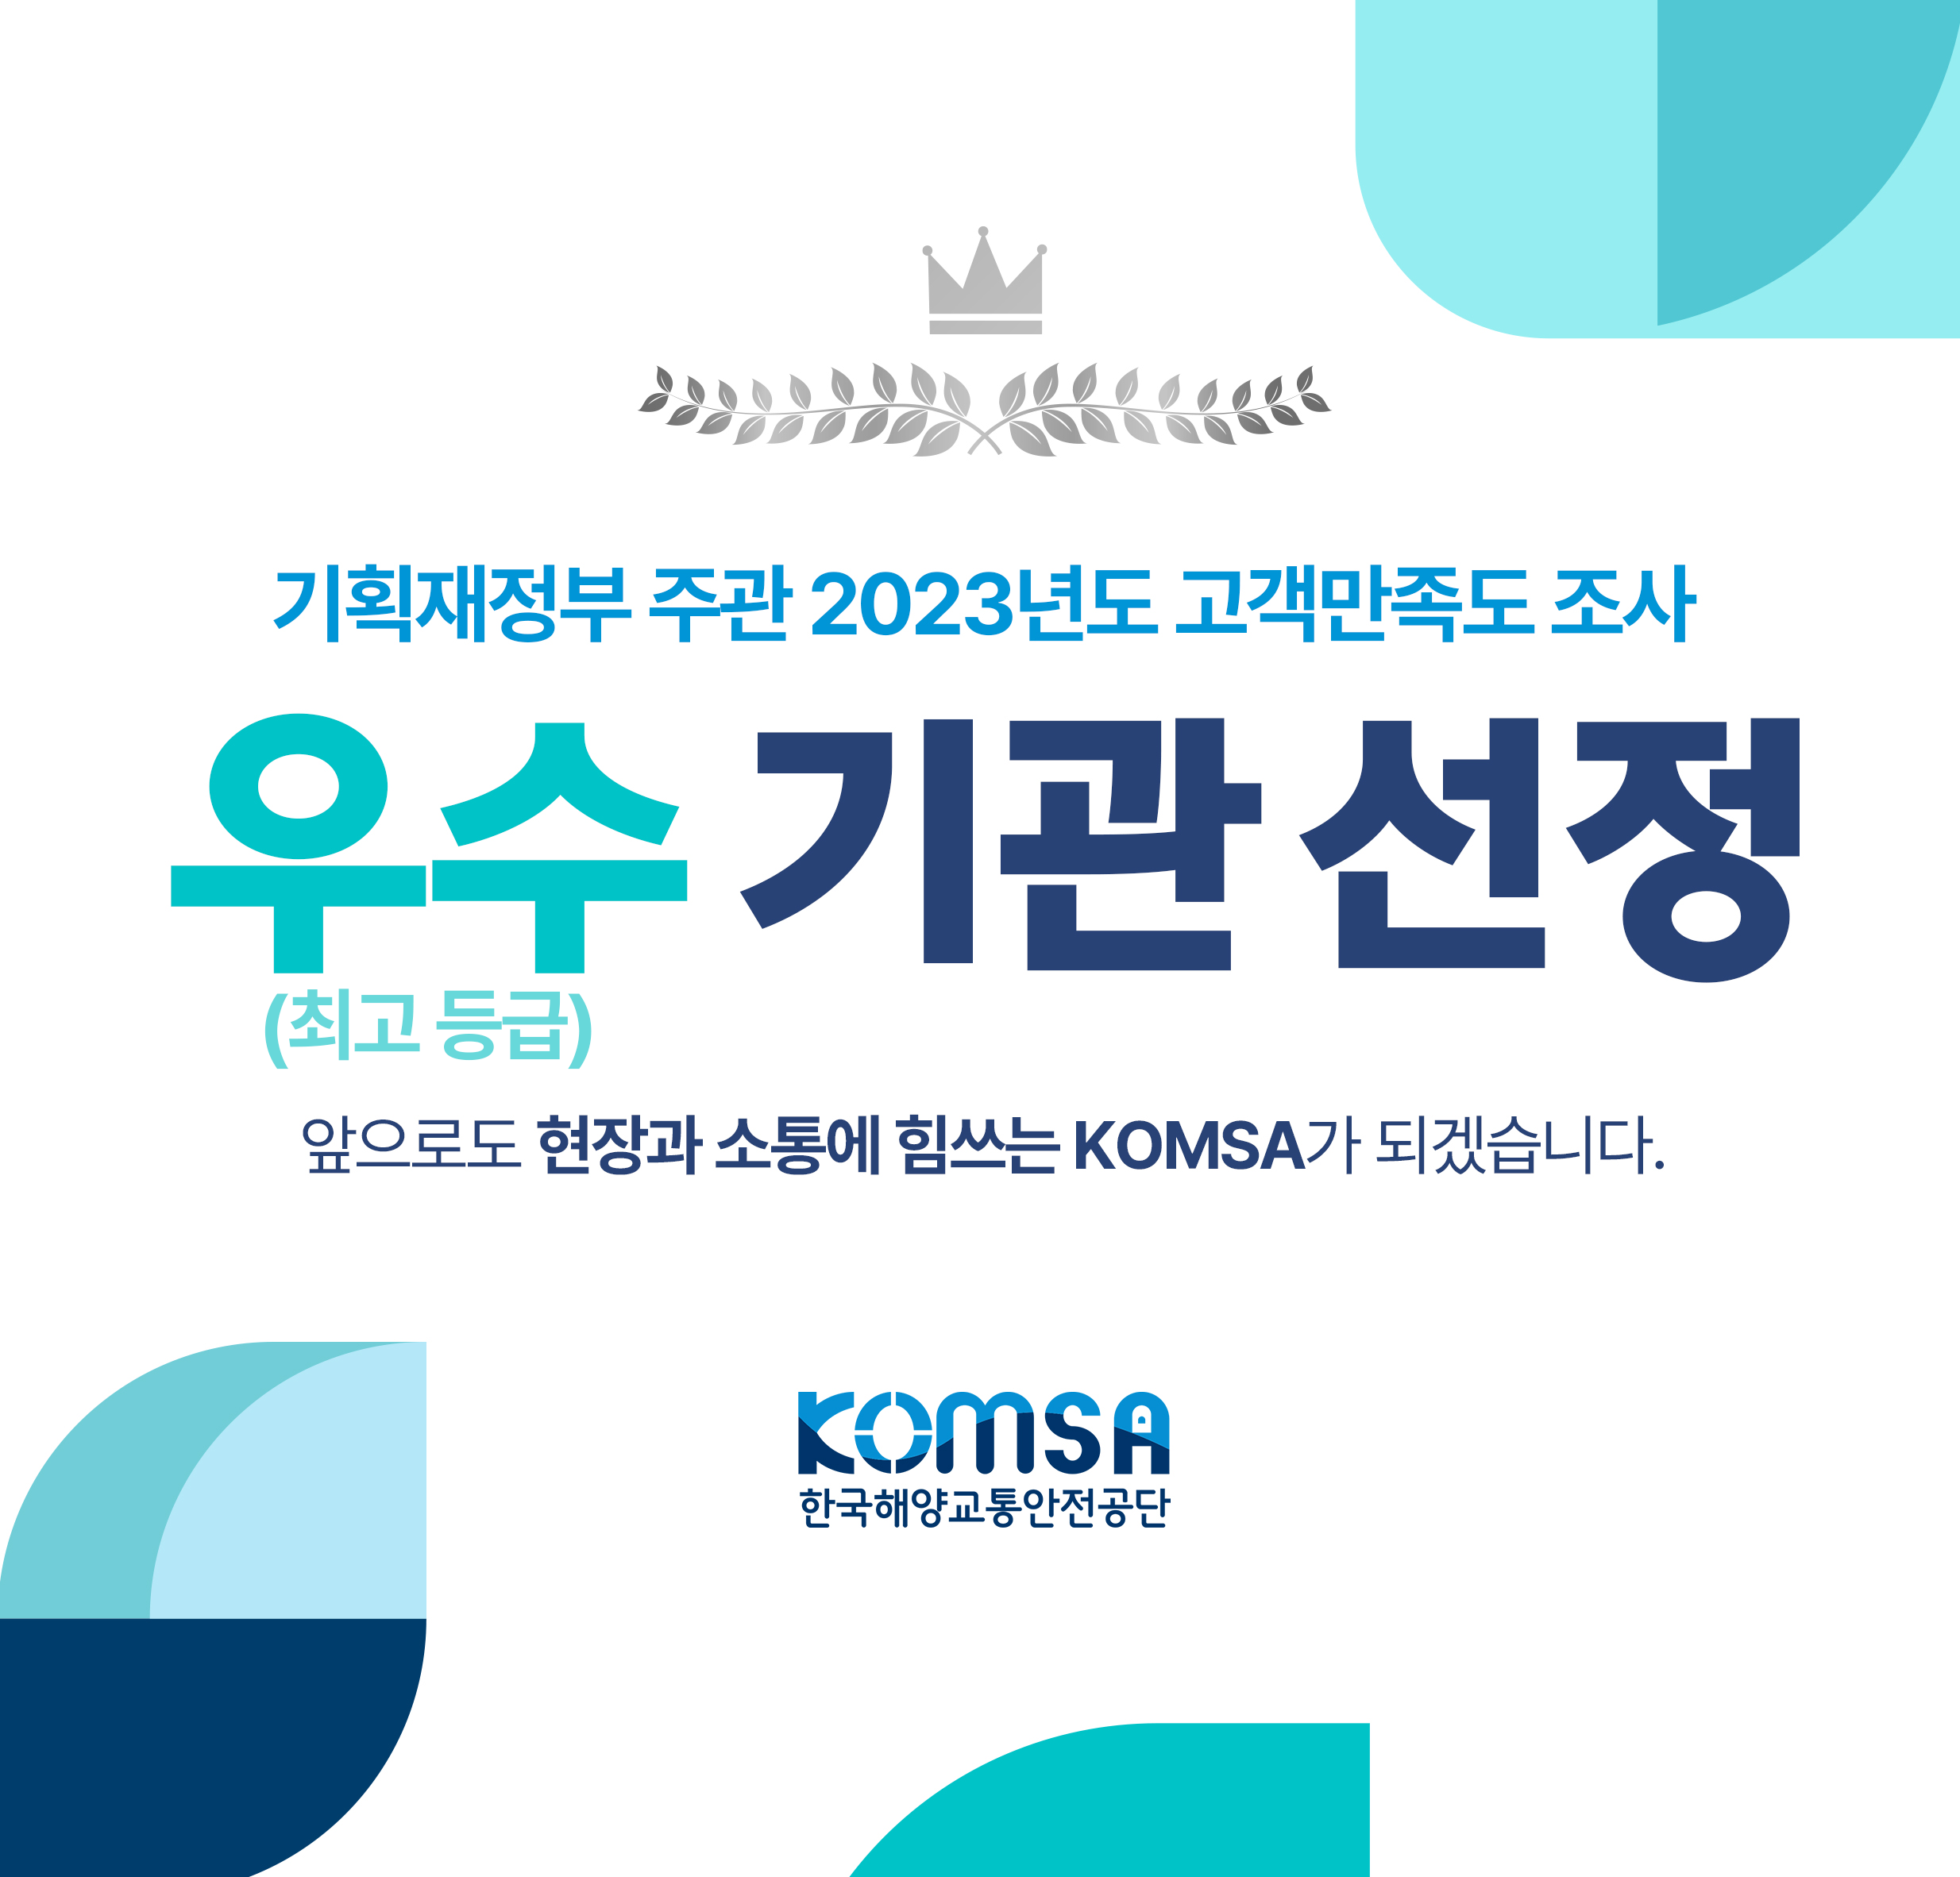 https://www.komsa.or.kr/kor/;jsessionid=9A0C8784A52EDEB591E66AAC019AAC21